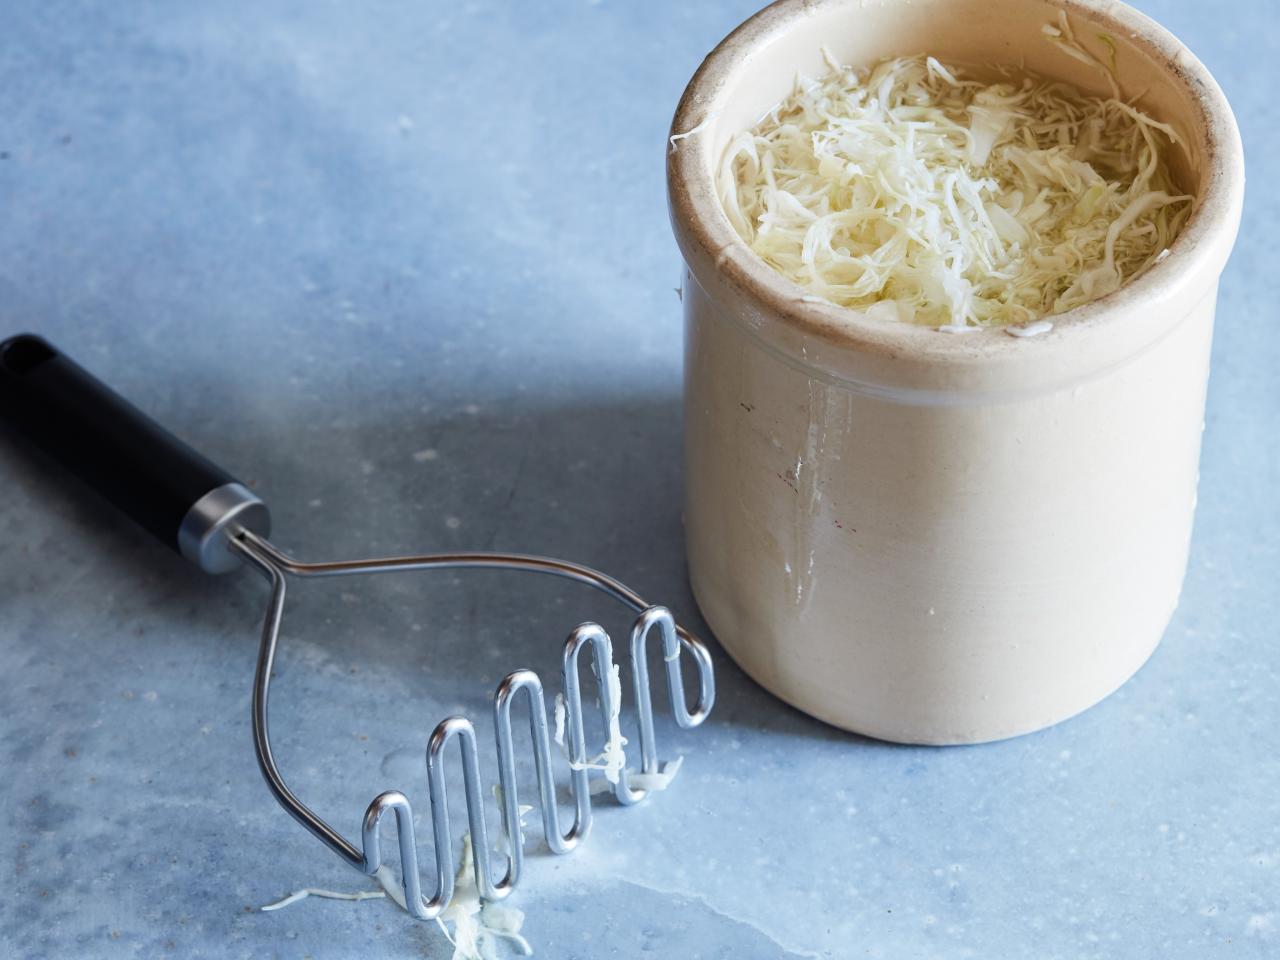 11 Uses for a Potato Masher, Cooking School